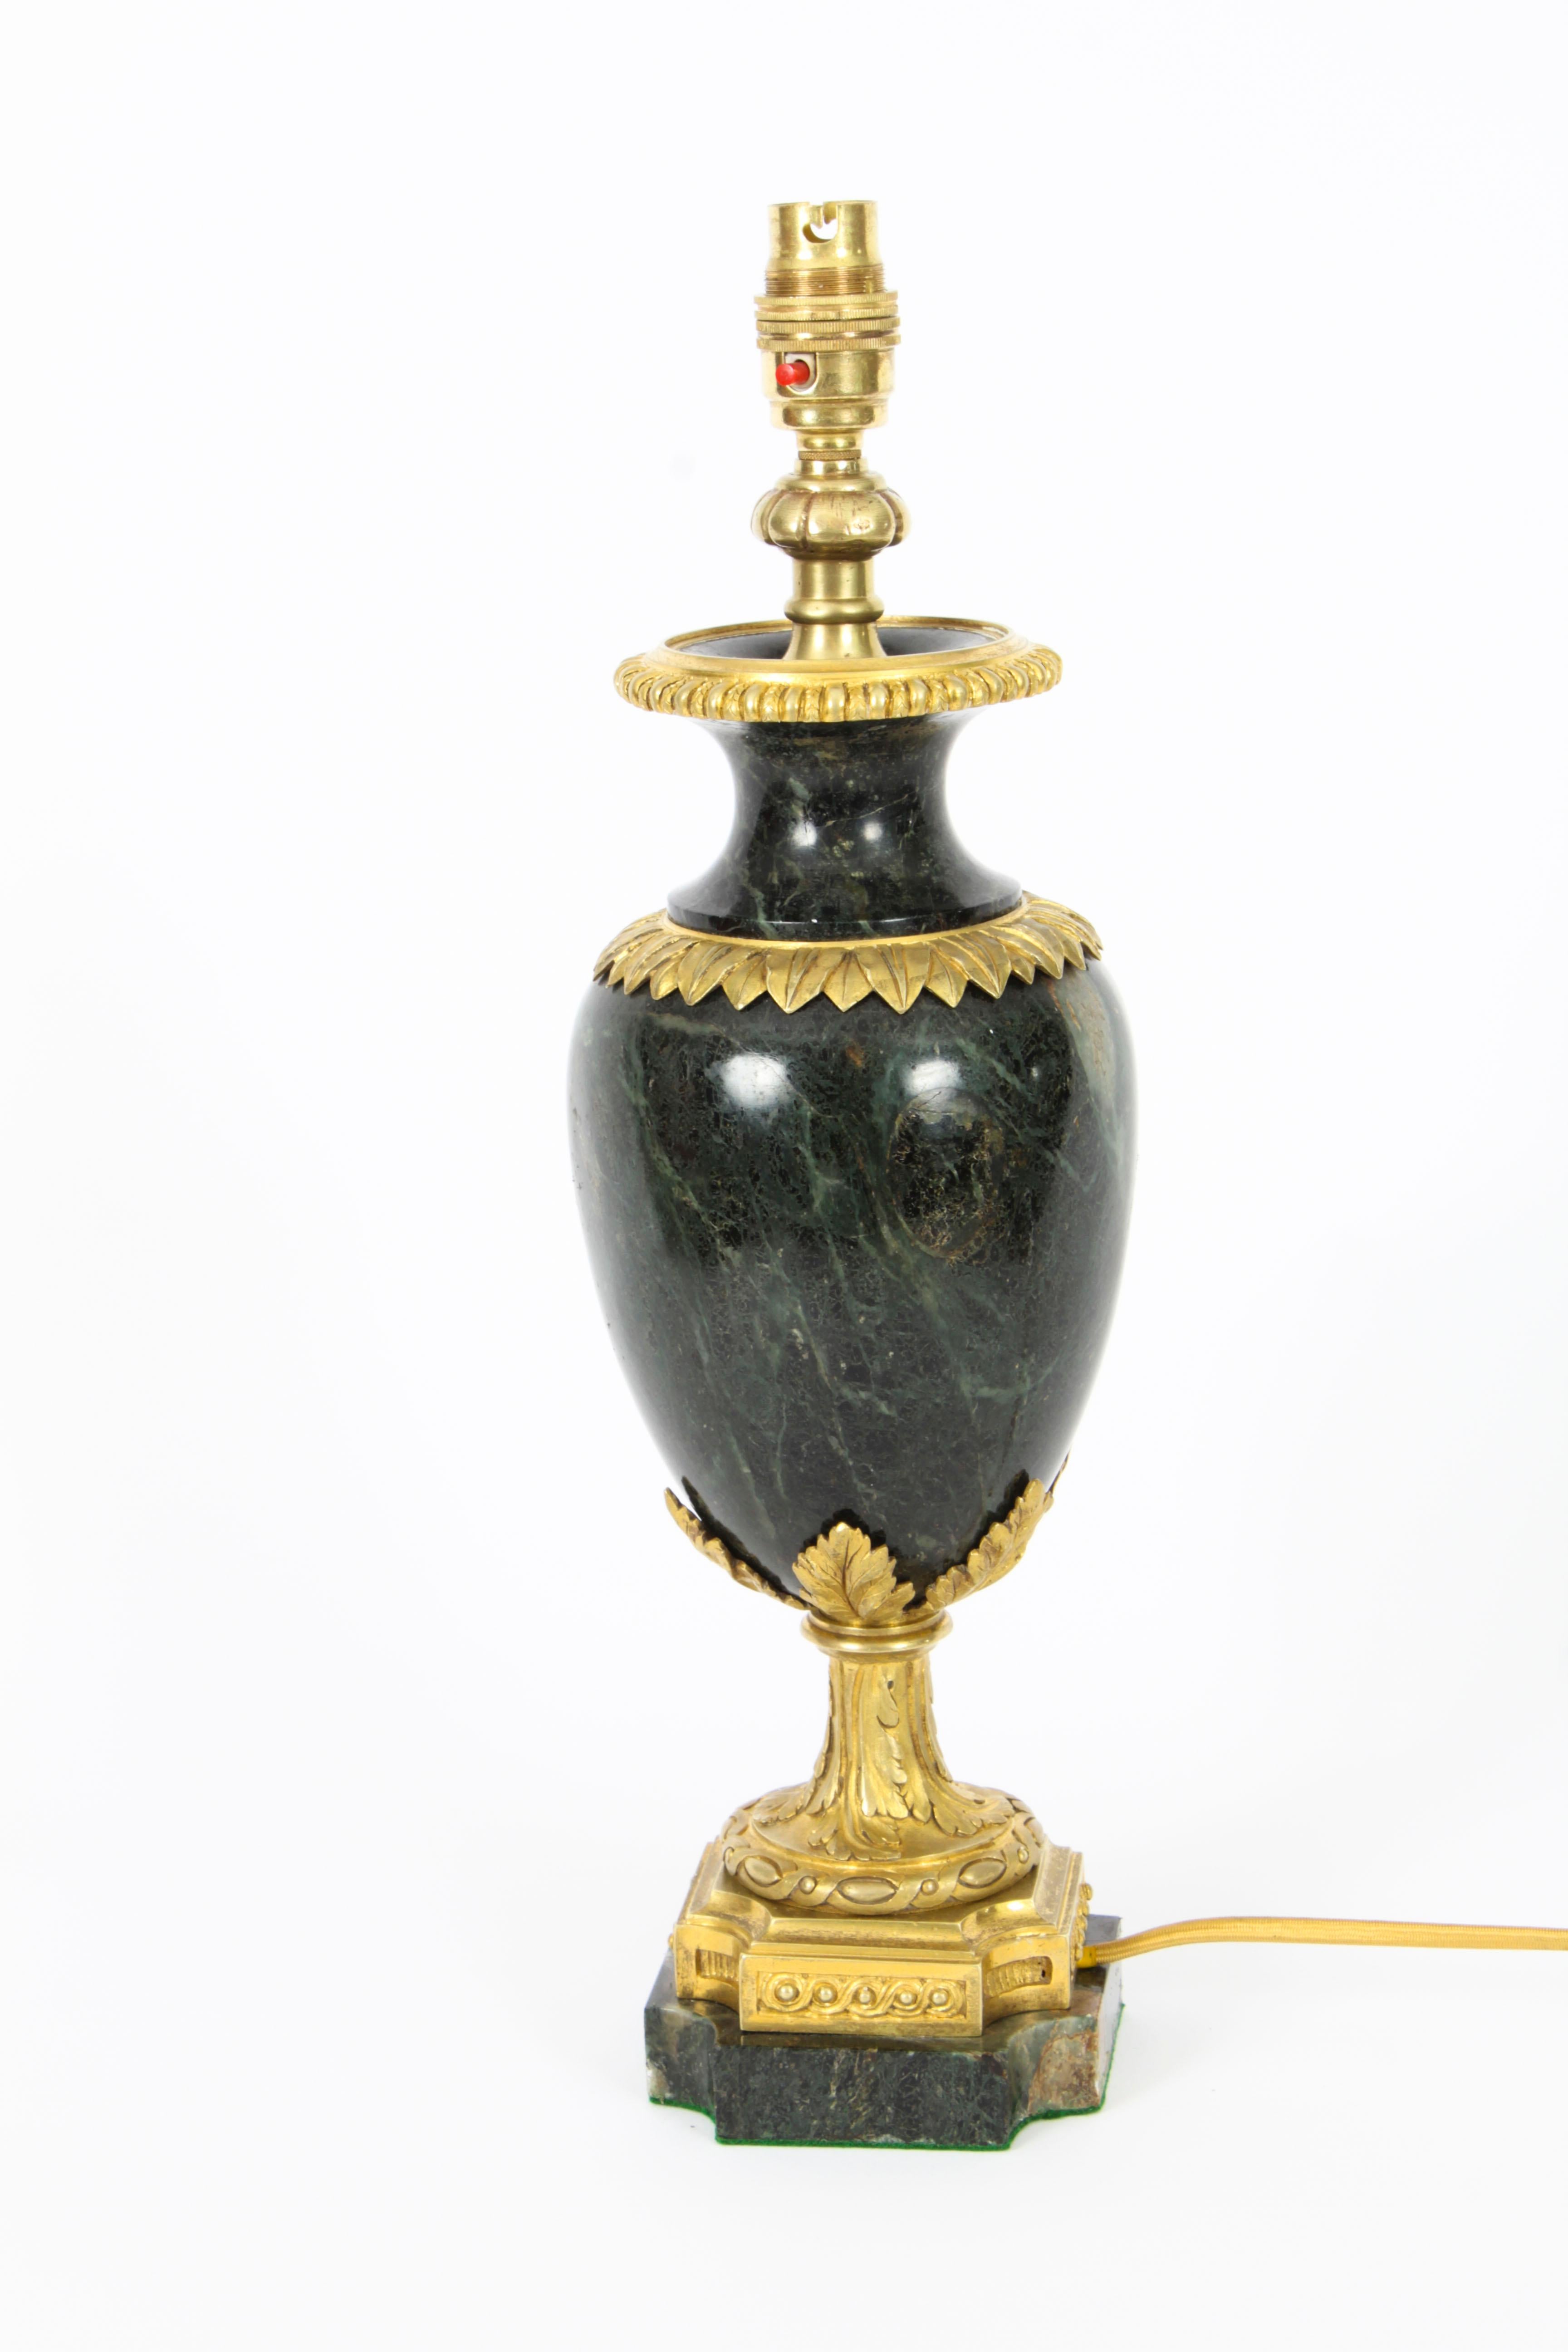 Antique Italian Ormolu Mounted Marble Table Lamp 19th Century In Good Condition For Sale In London, GB